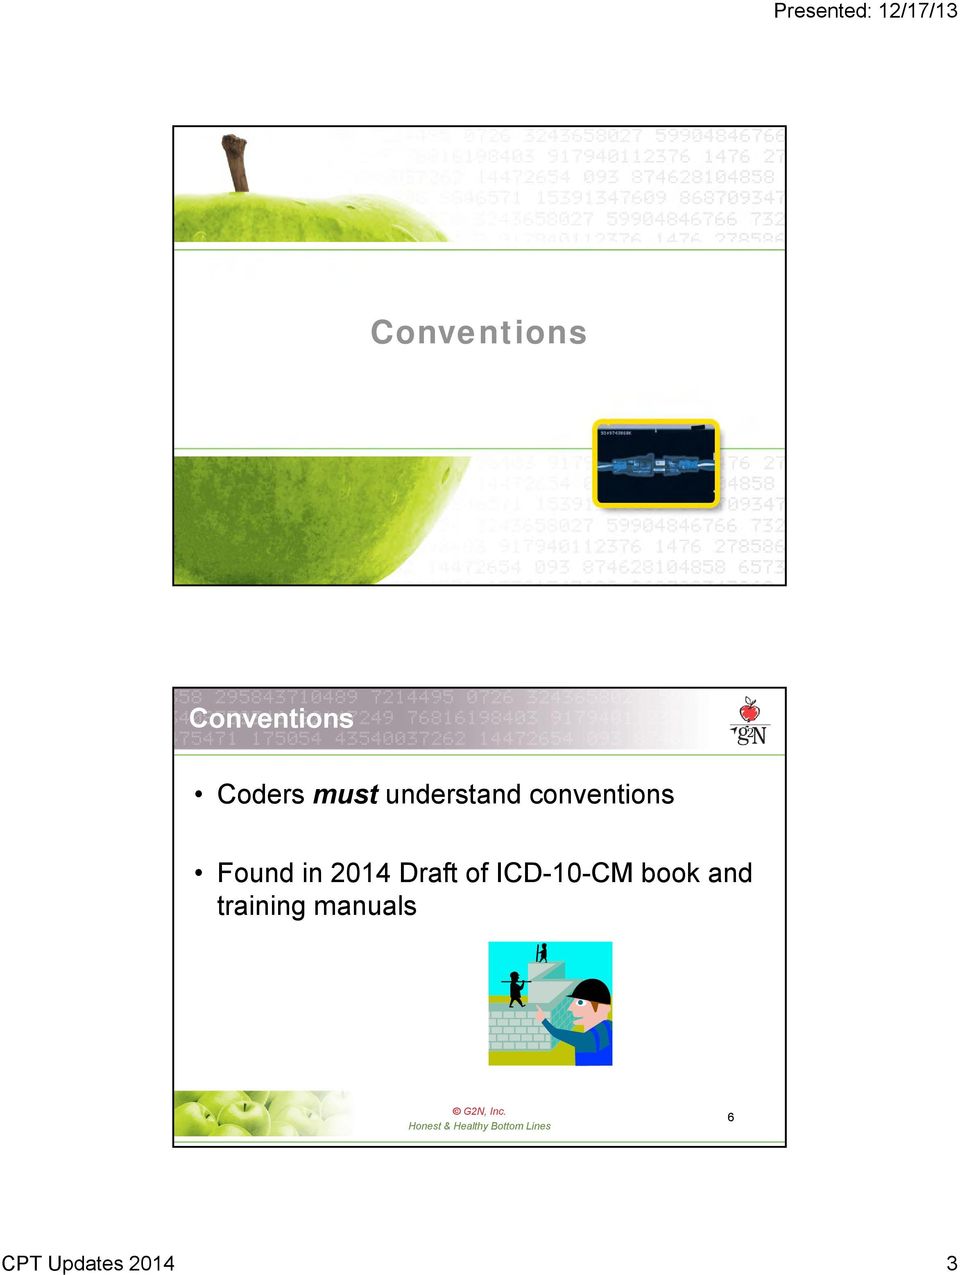 Draft of ICD-10-CM book and